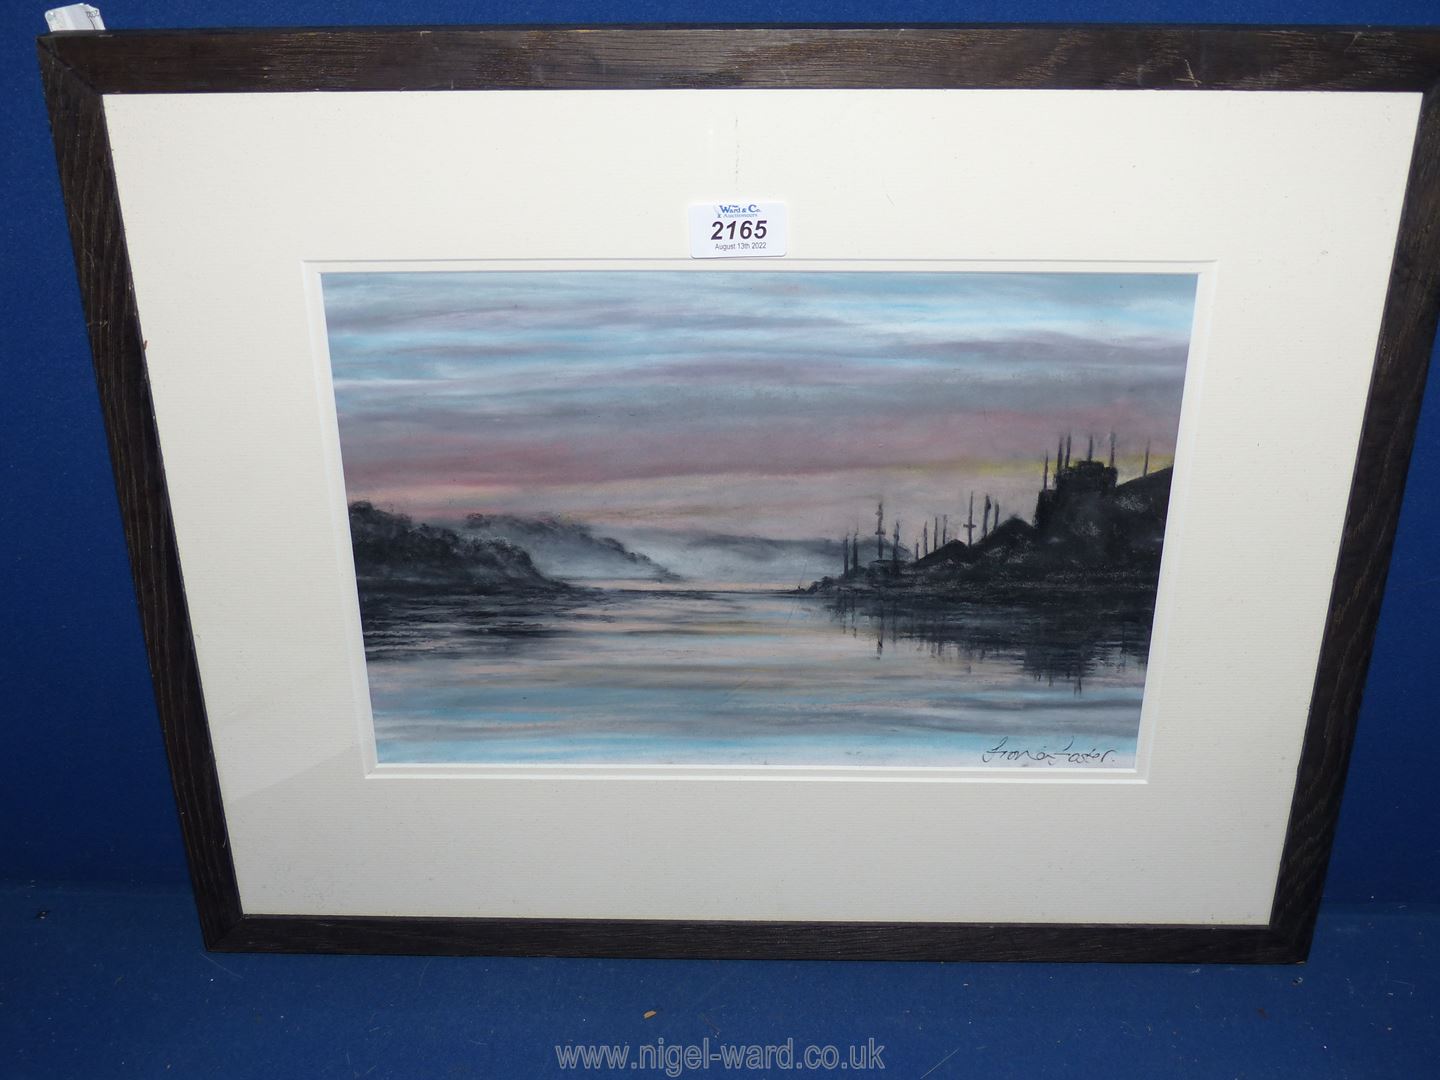 A framed and mounted watercolour depicting a coastal scene at sunset,